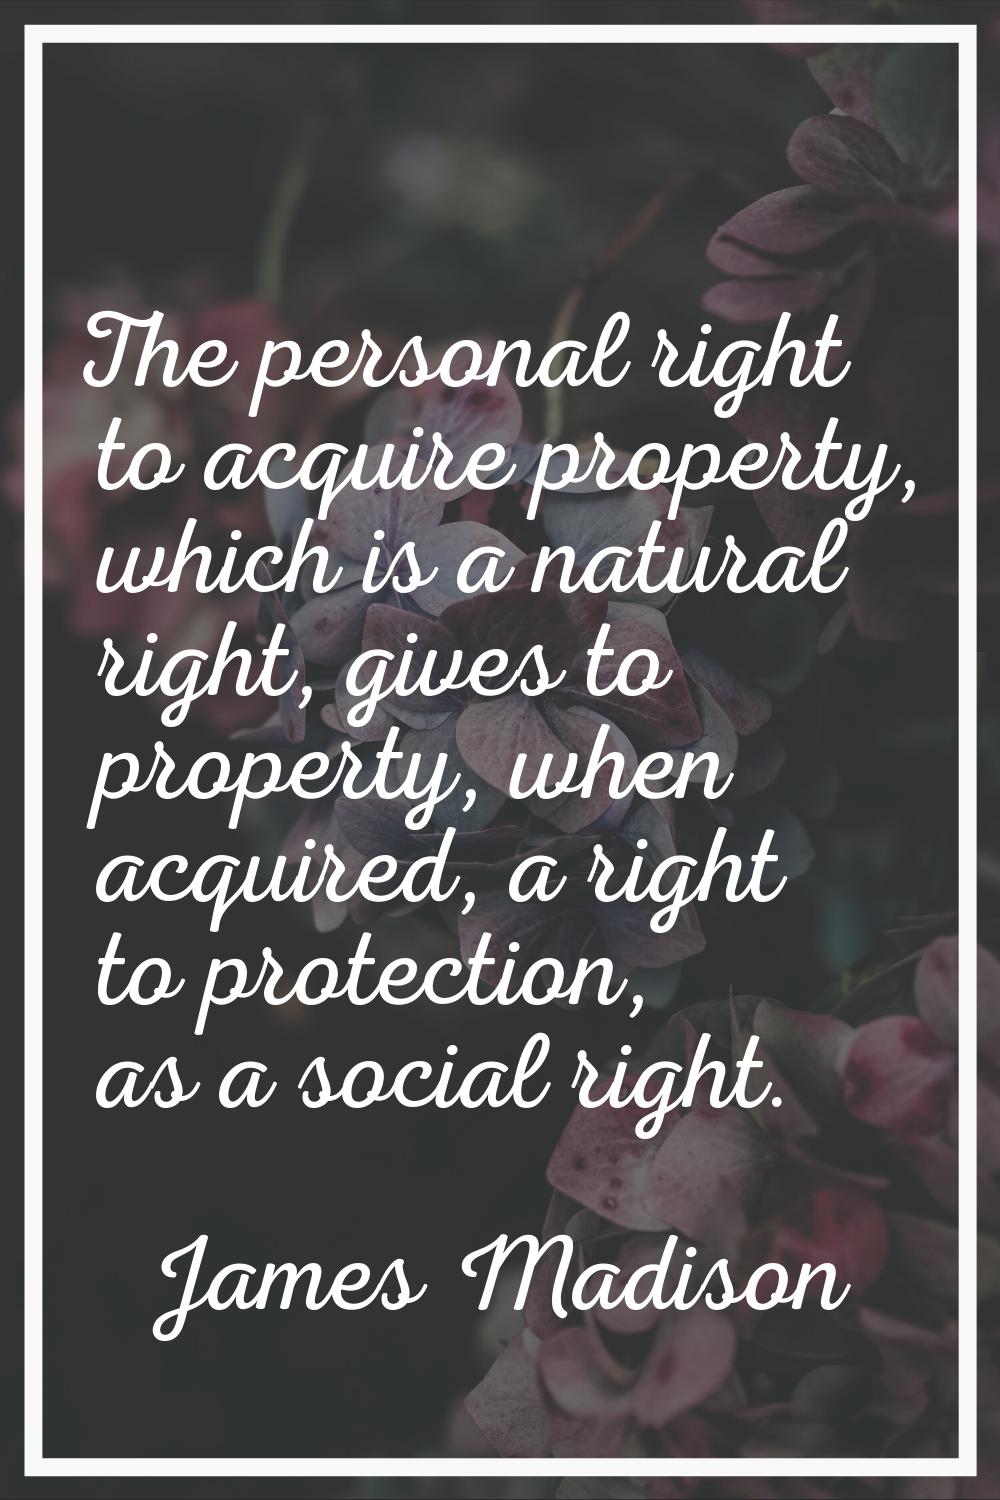 The personal right to acquire property, which is a natural right, gives to property, when acquired,